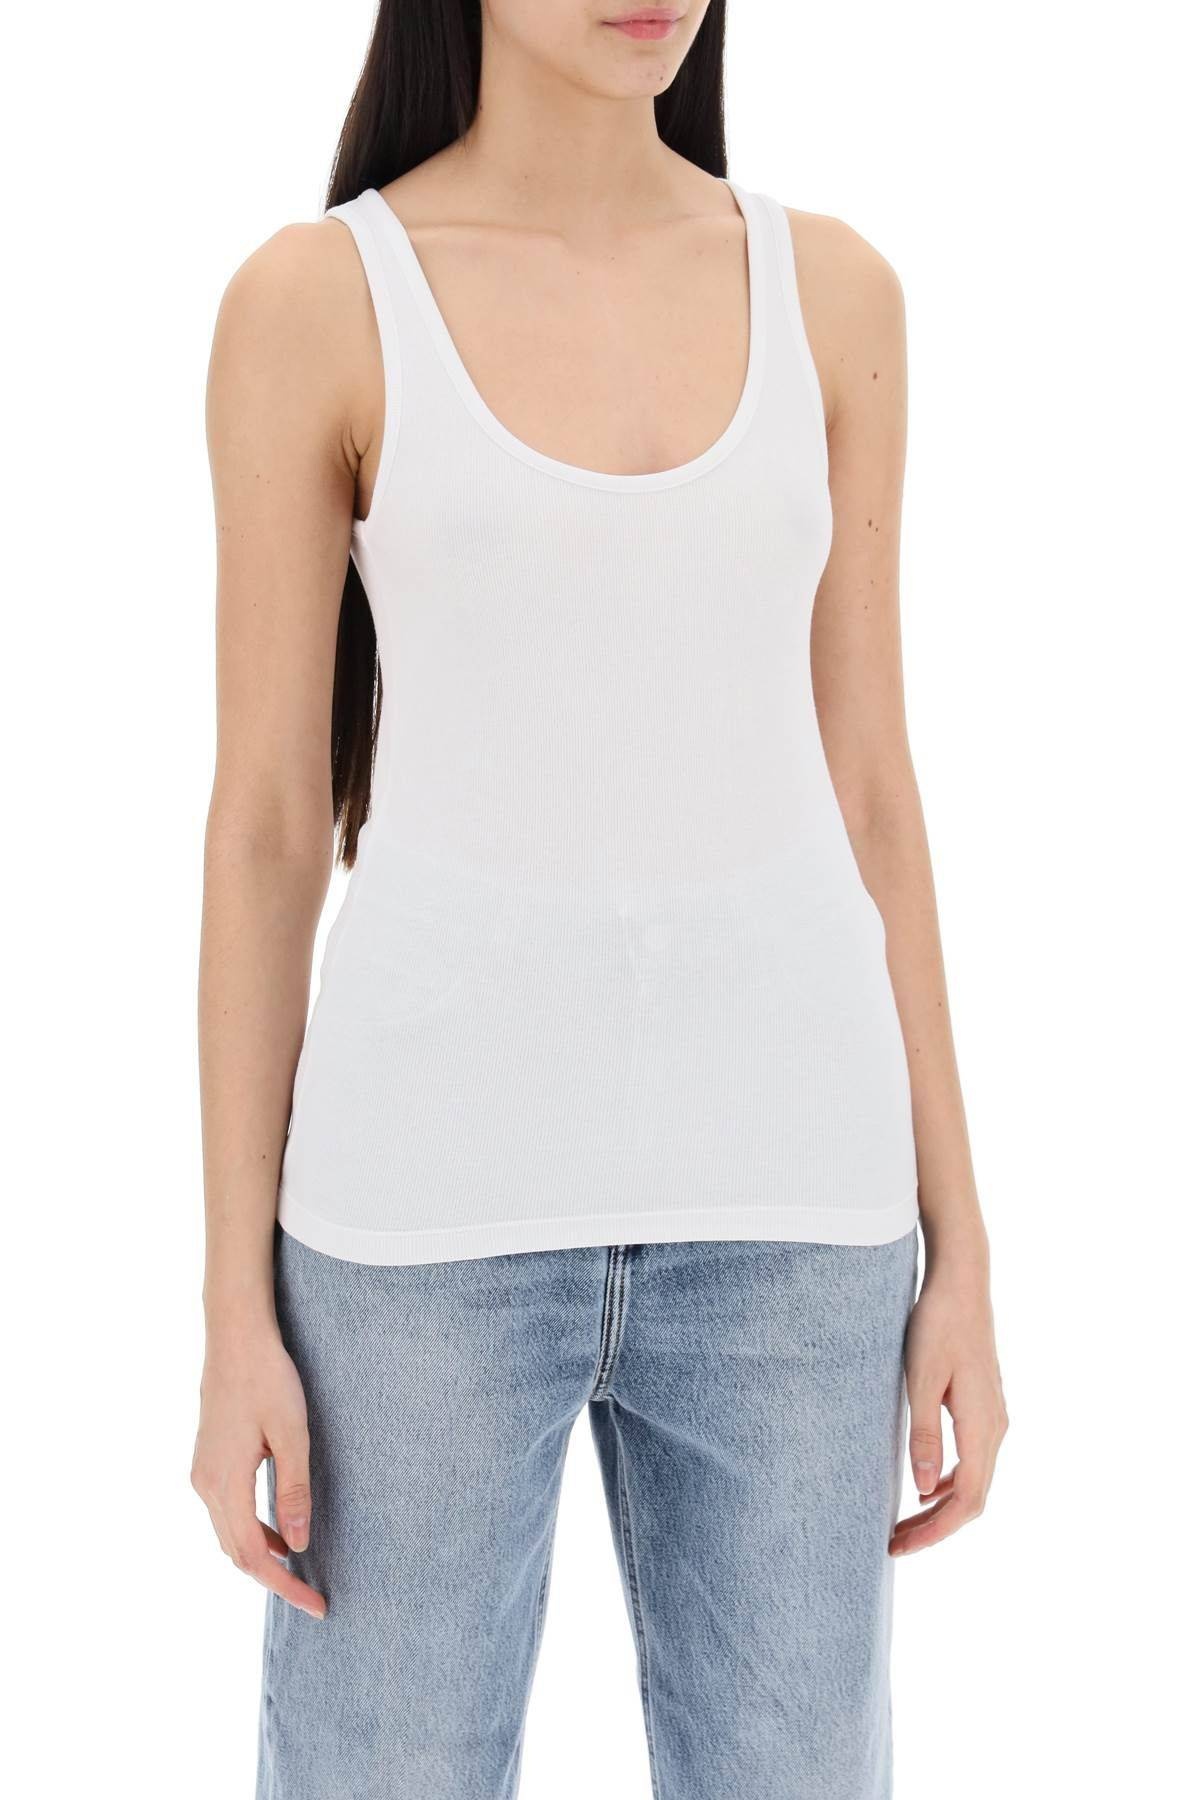 "RIBBED JERSEY TANK TOP WITH - 3